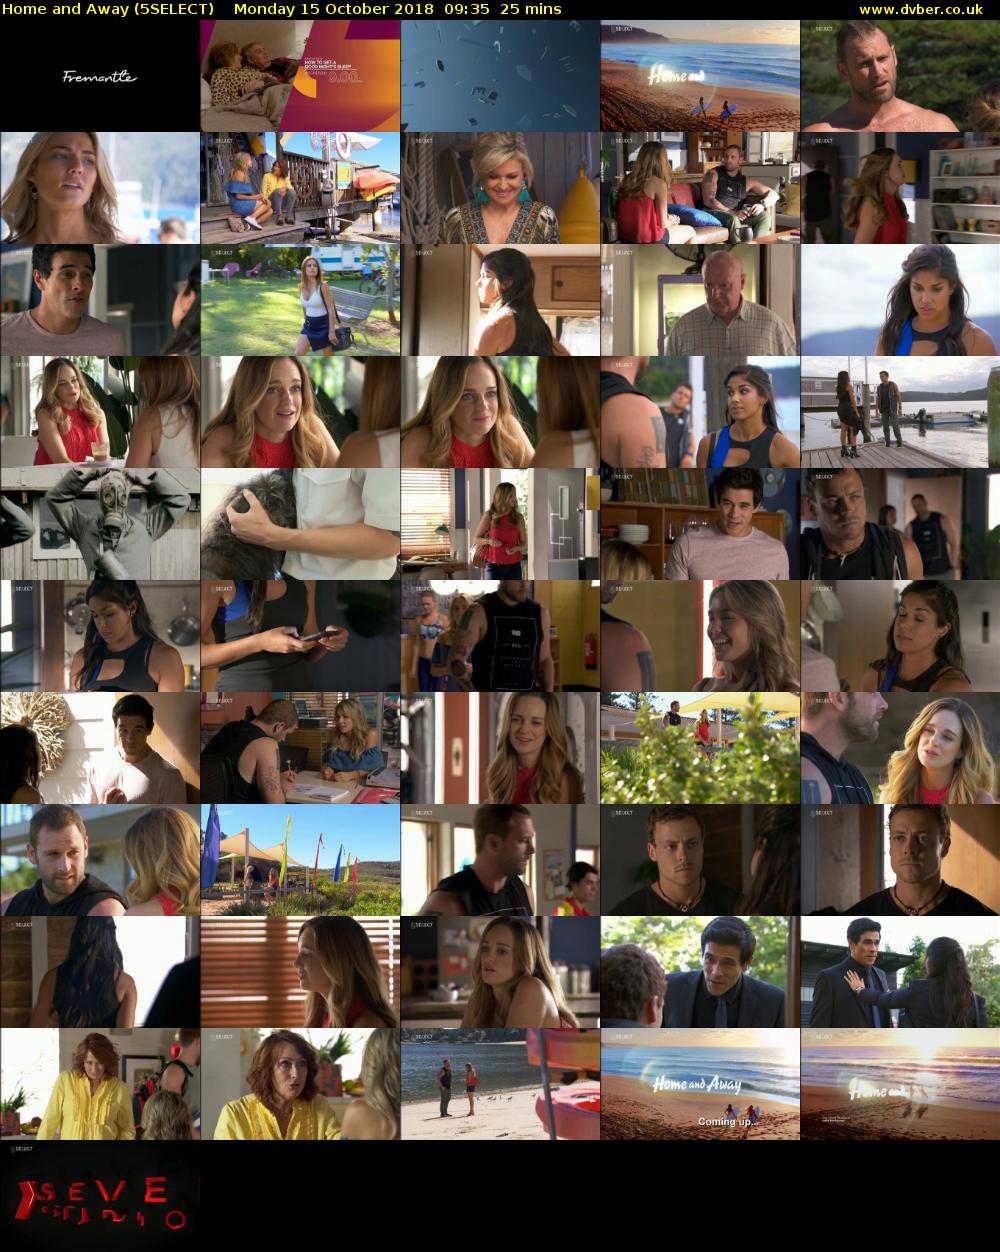 Home and Away (5SELECT) Monday 15 October 2018 09:35 - 10:00